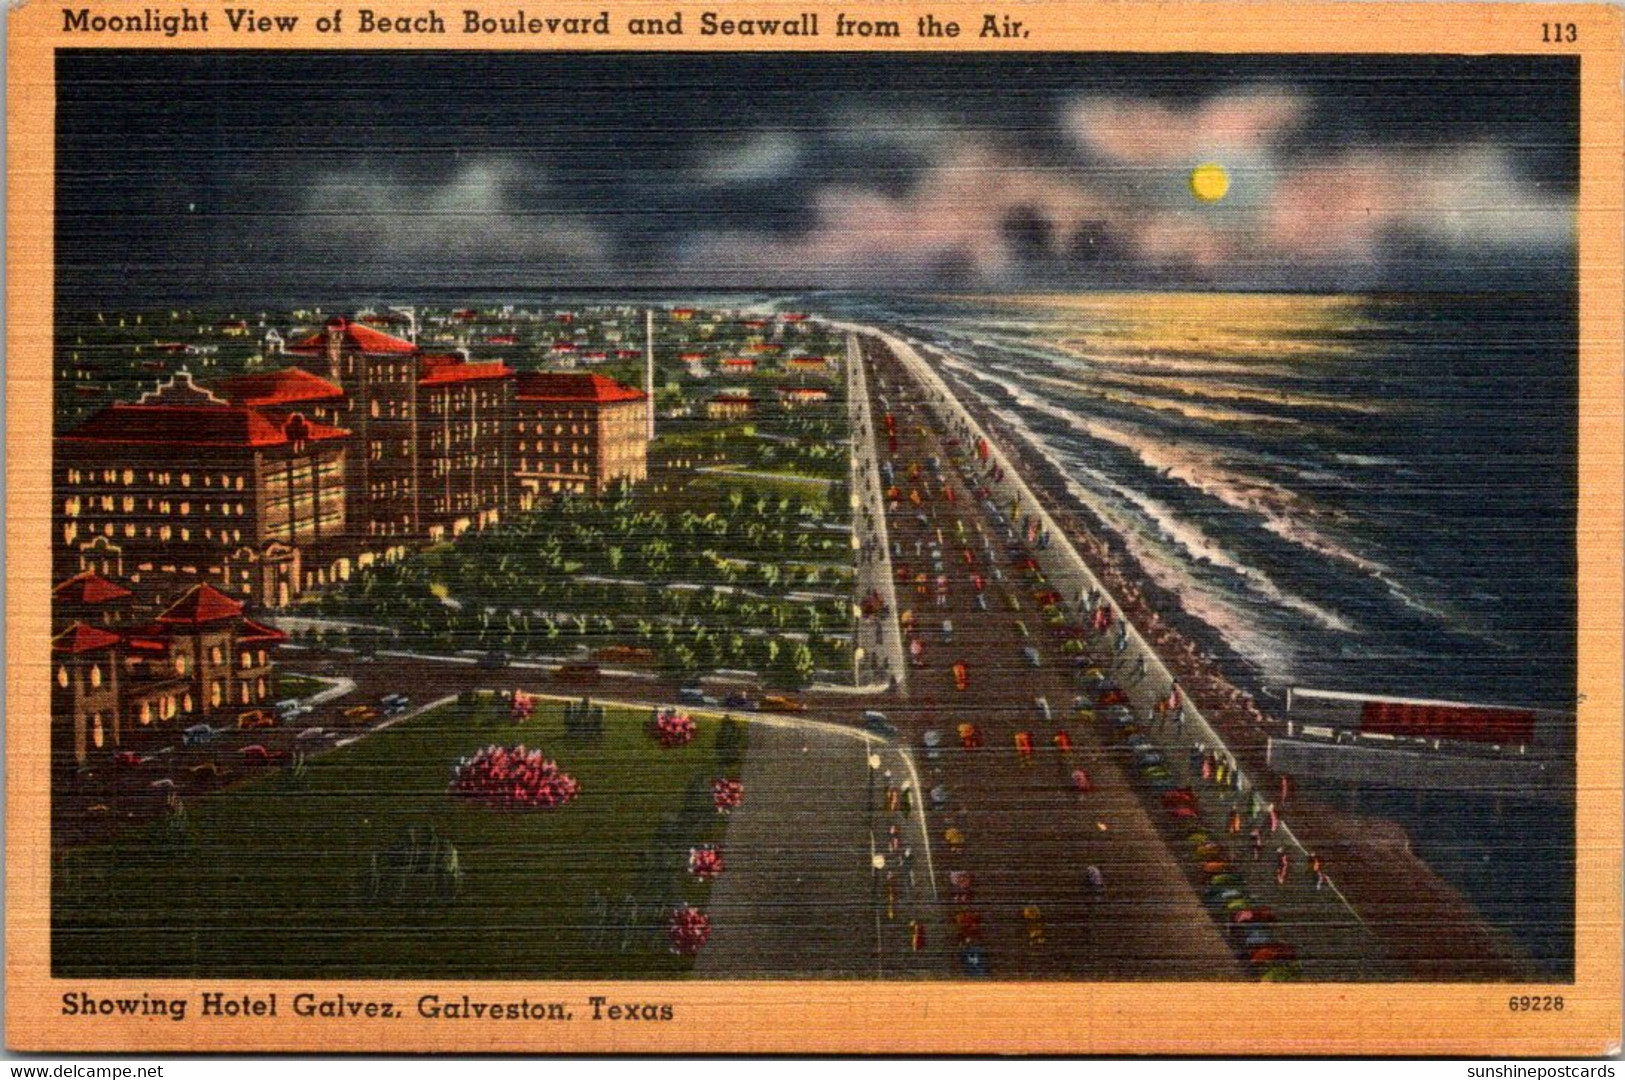 Texas Galveston Moonlight View Of Beach And Seawall From The Air - Galveston